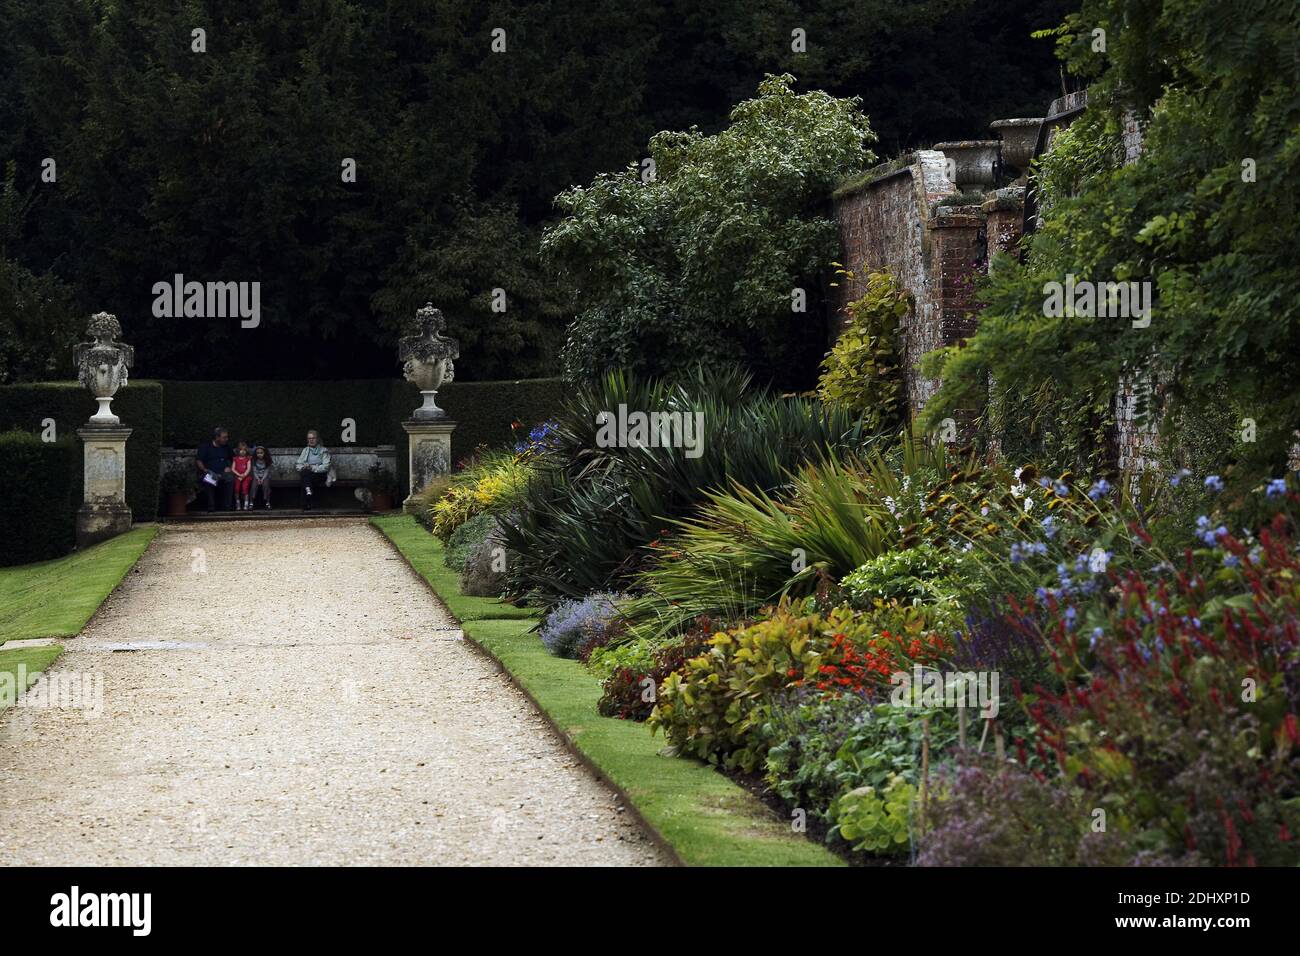 GREAT BRITAIN / England /Polesden Lacey colourful walled garden with a mixture of flowers. Stock Photo